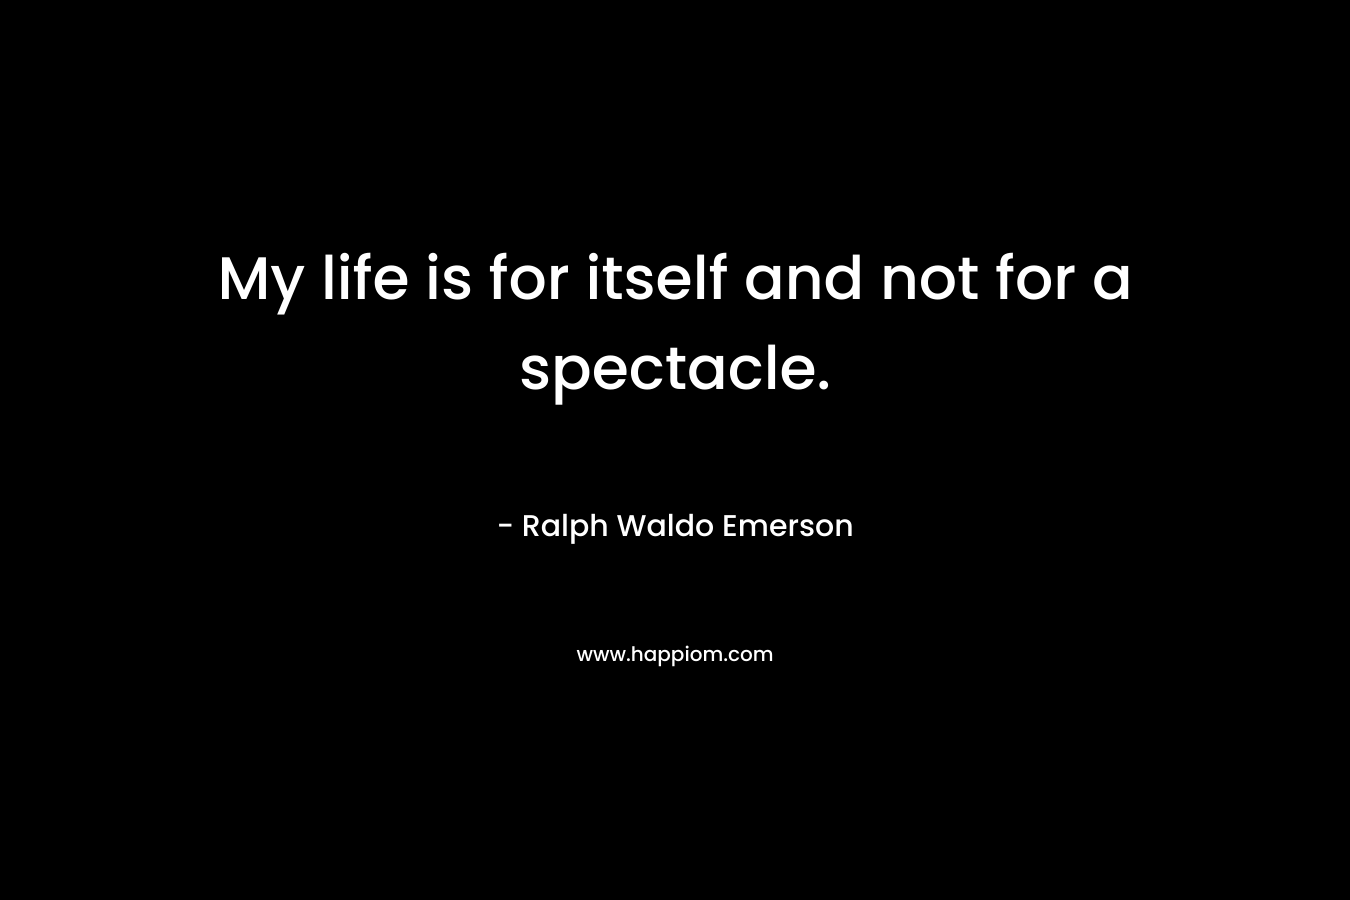 My life is for itself and not for a spectacle.